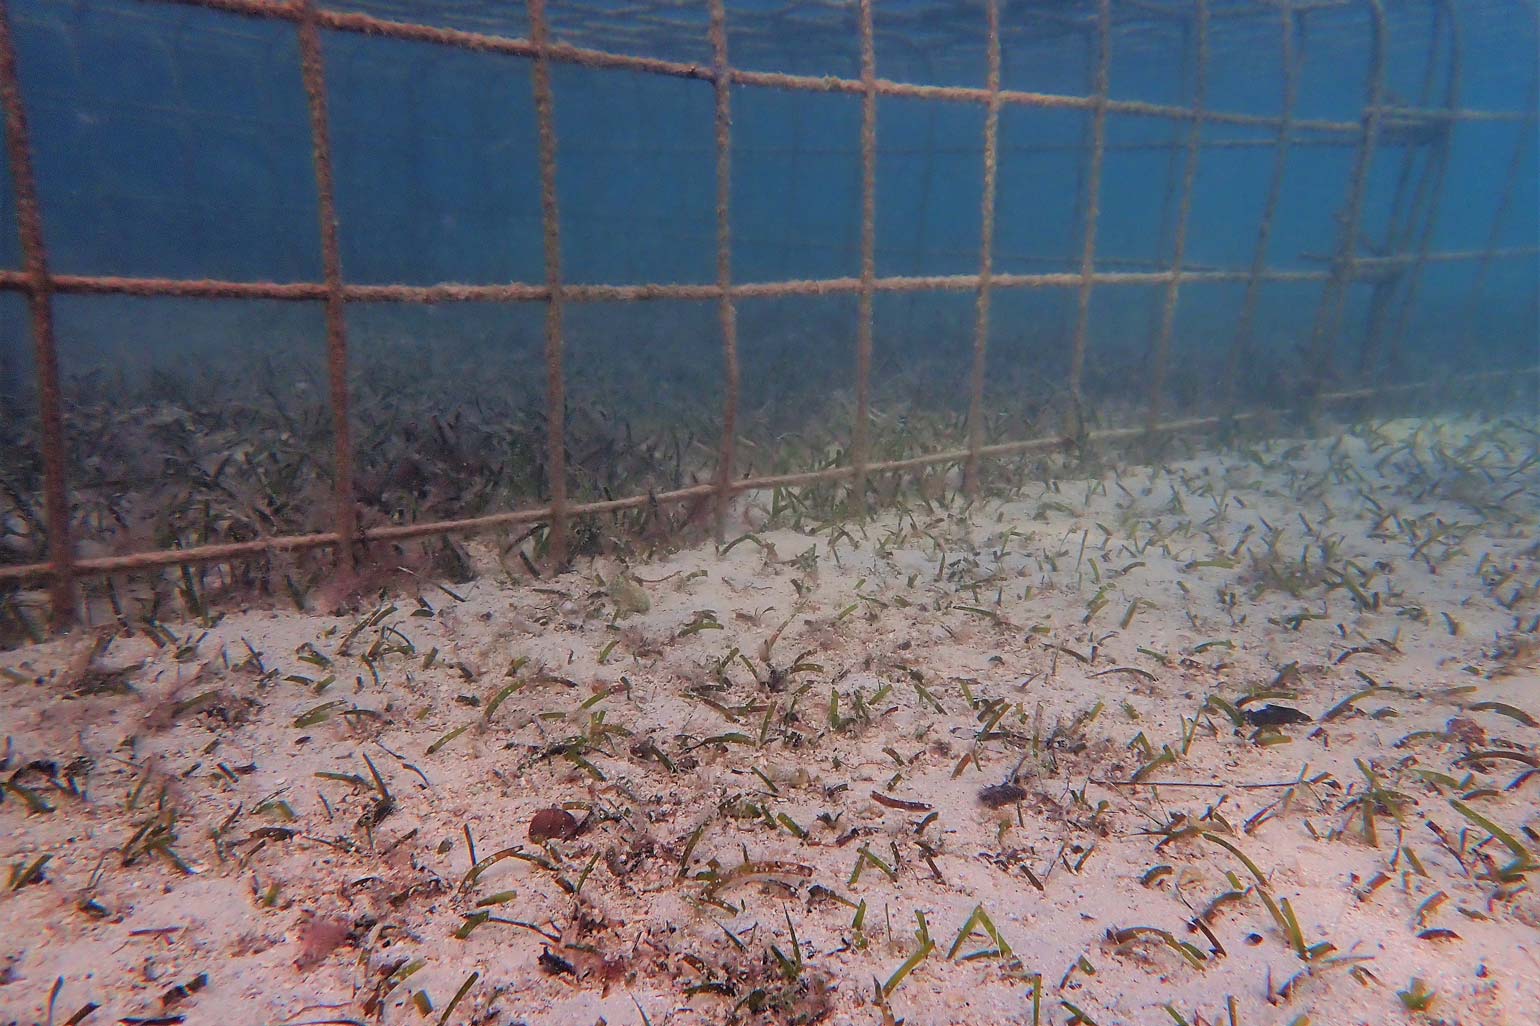 Grazed seagrass outside the cages near Spanish Point